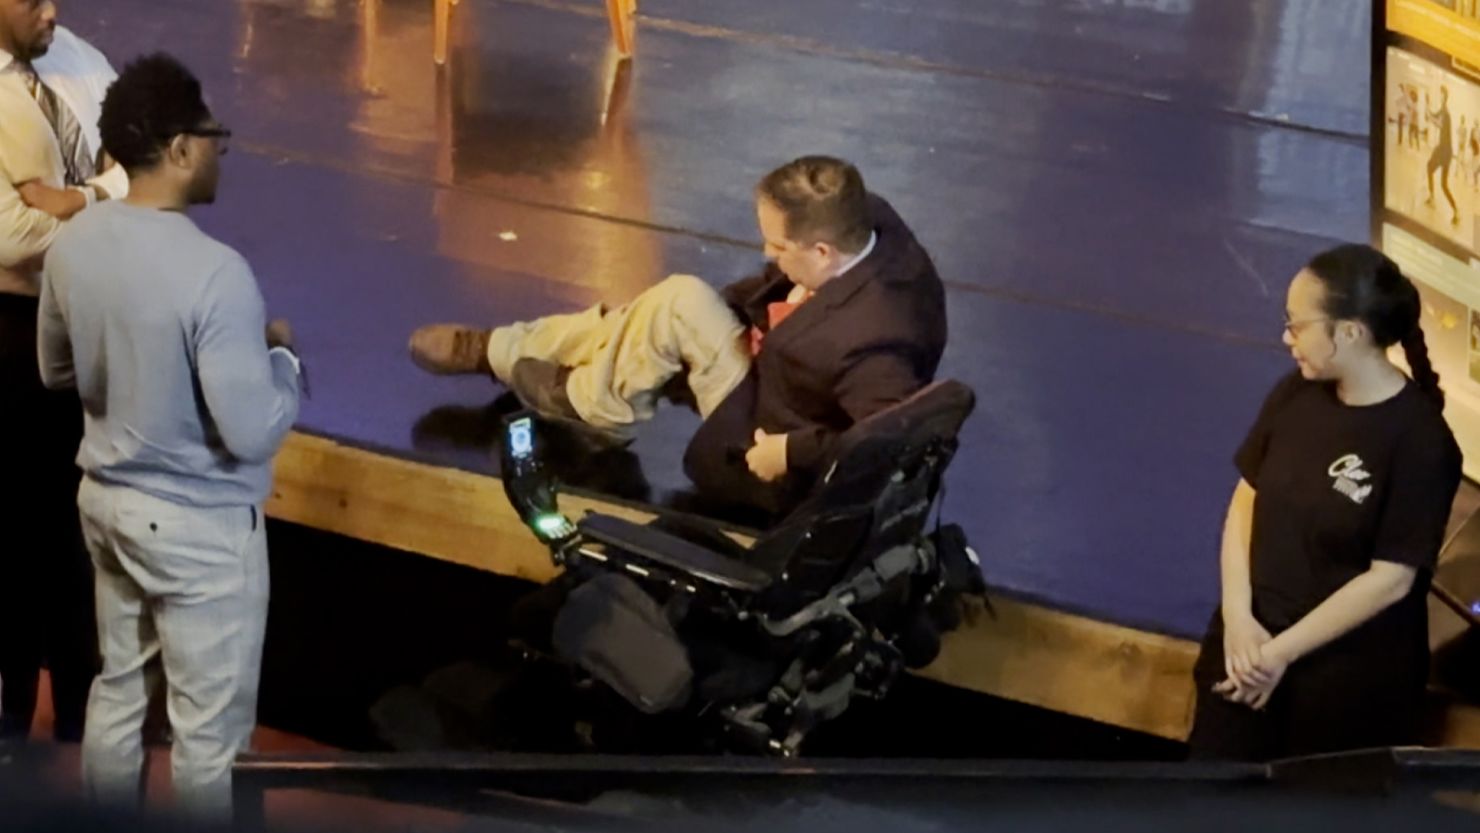 First-term Denver councilmember Chris Hinds dragged himself onto a stage before a political debate Monday due to lack of wheelchair accessibility.